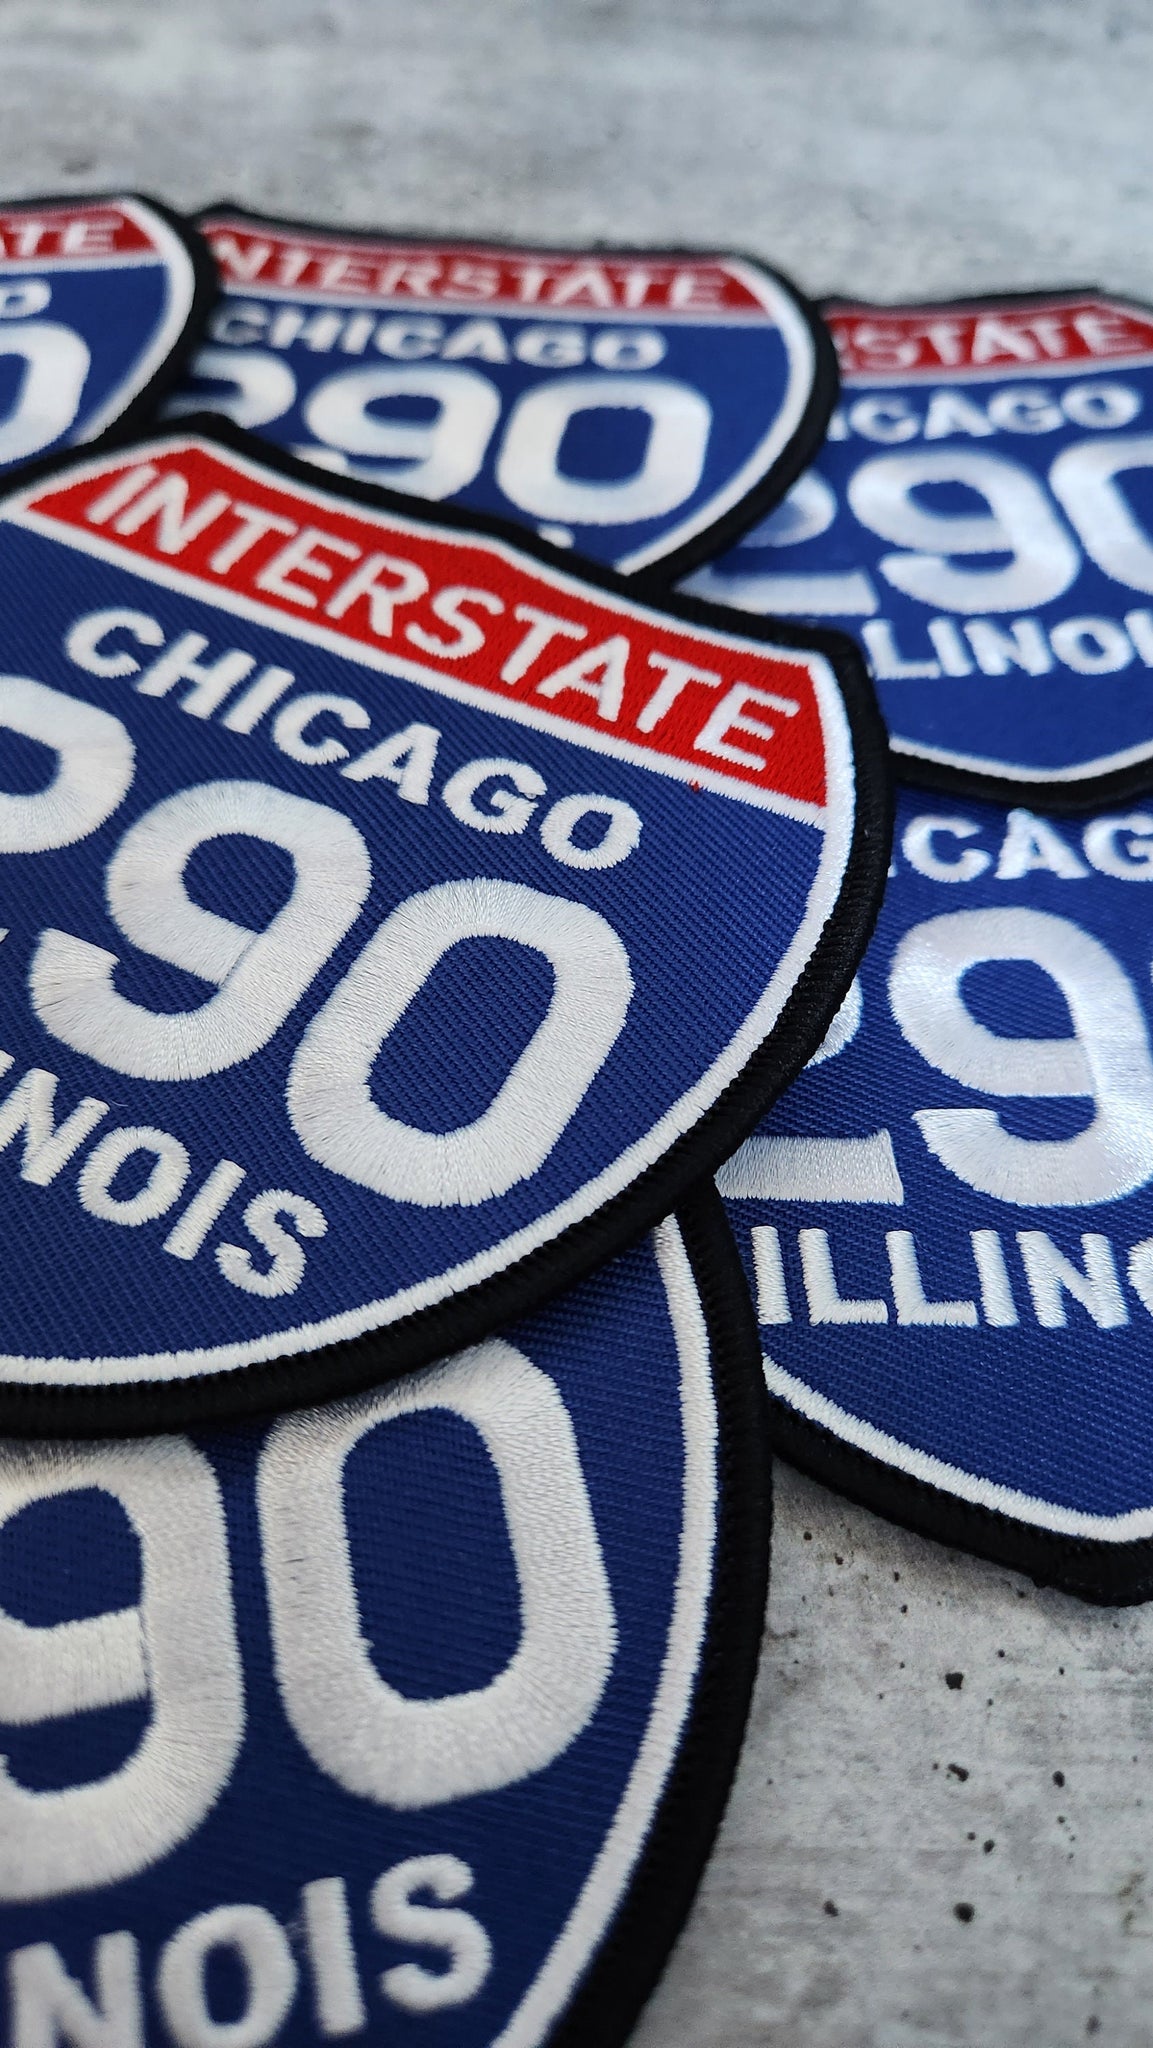 Collectable 1-pc, "CHICAGO 4" Interstate 290" Iron-On Embroidered Patch; Popular Chicago Emblem, Red/White/Blue Badge, Patch for Jackets